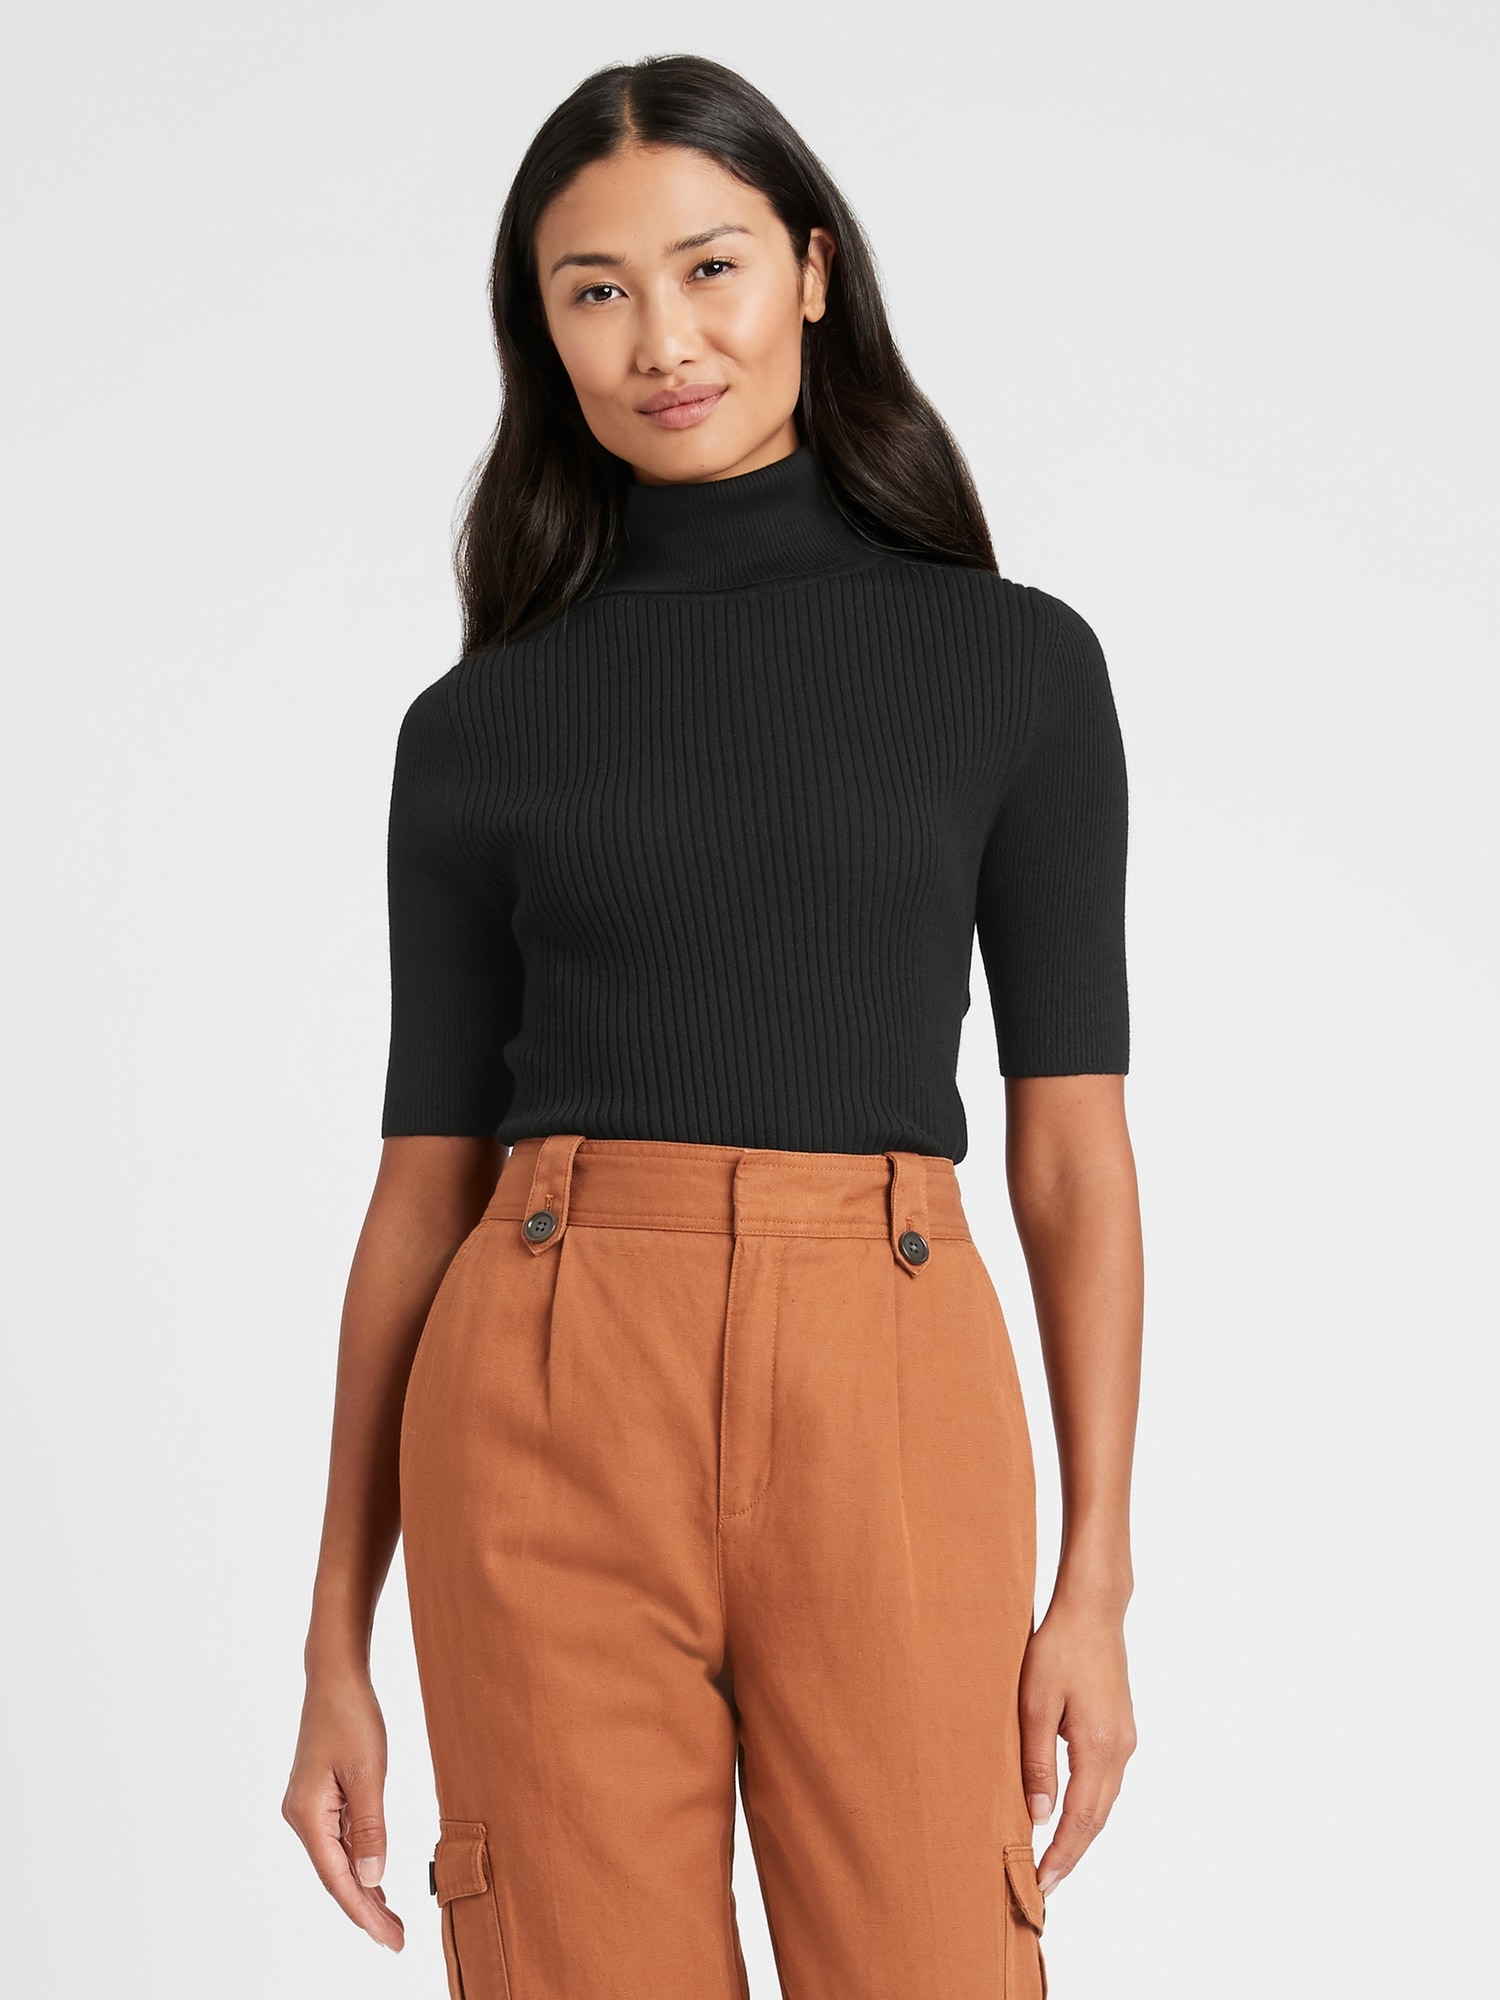 Fitted Turtleneck Sweater Top